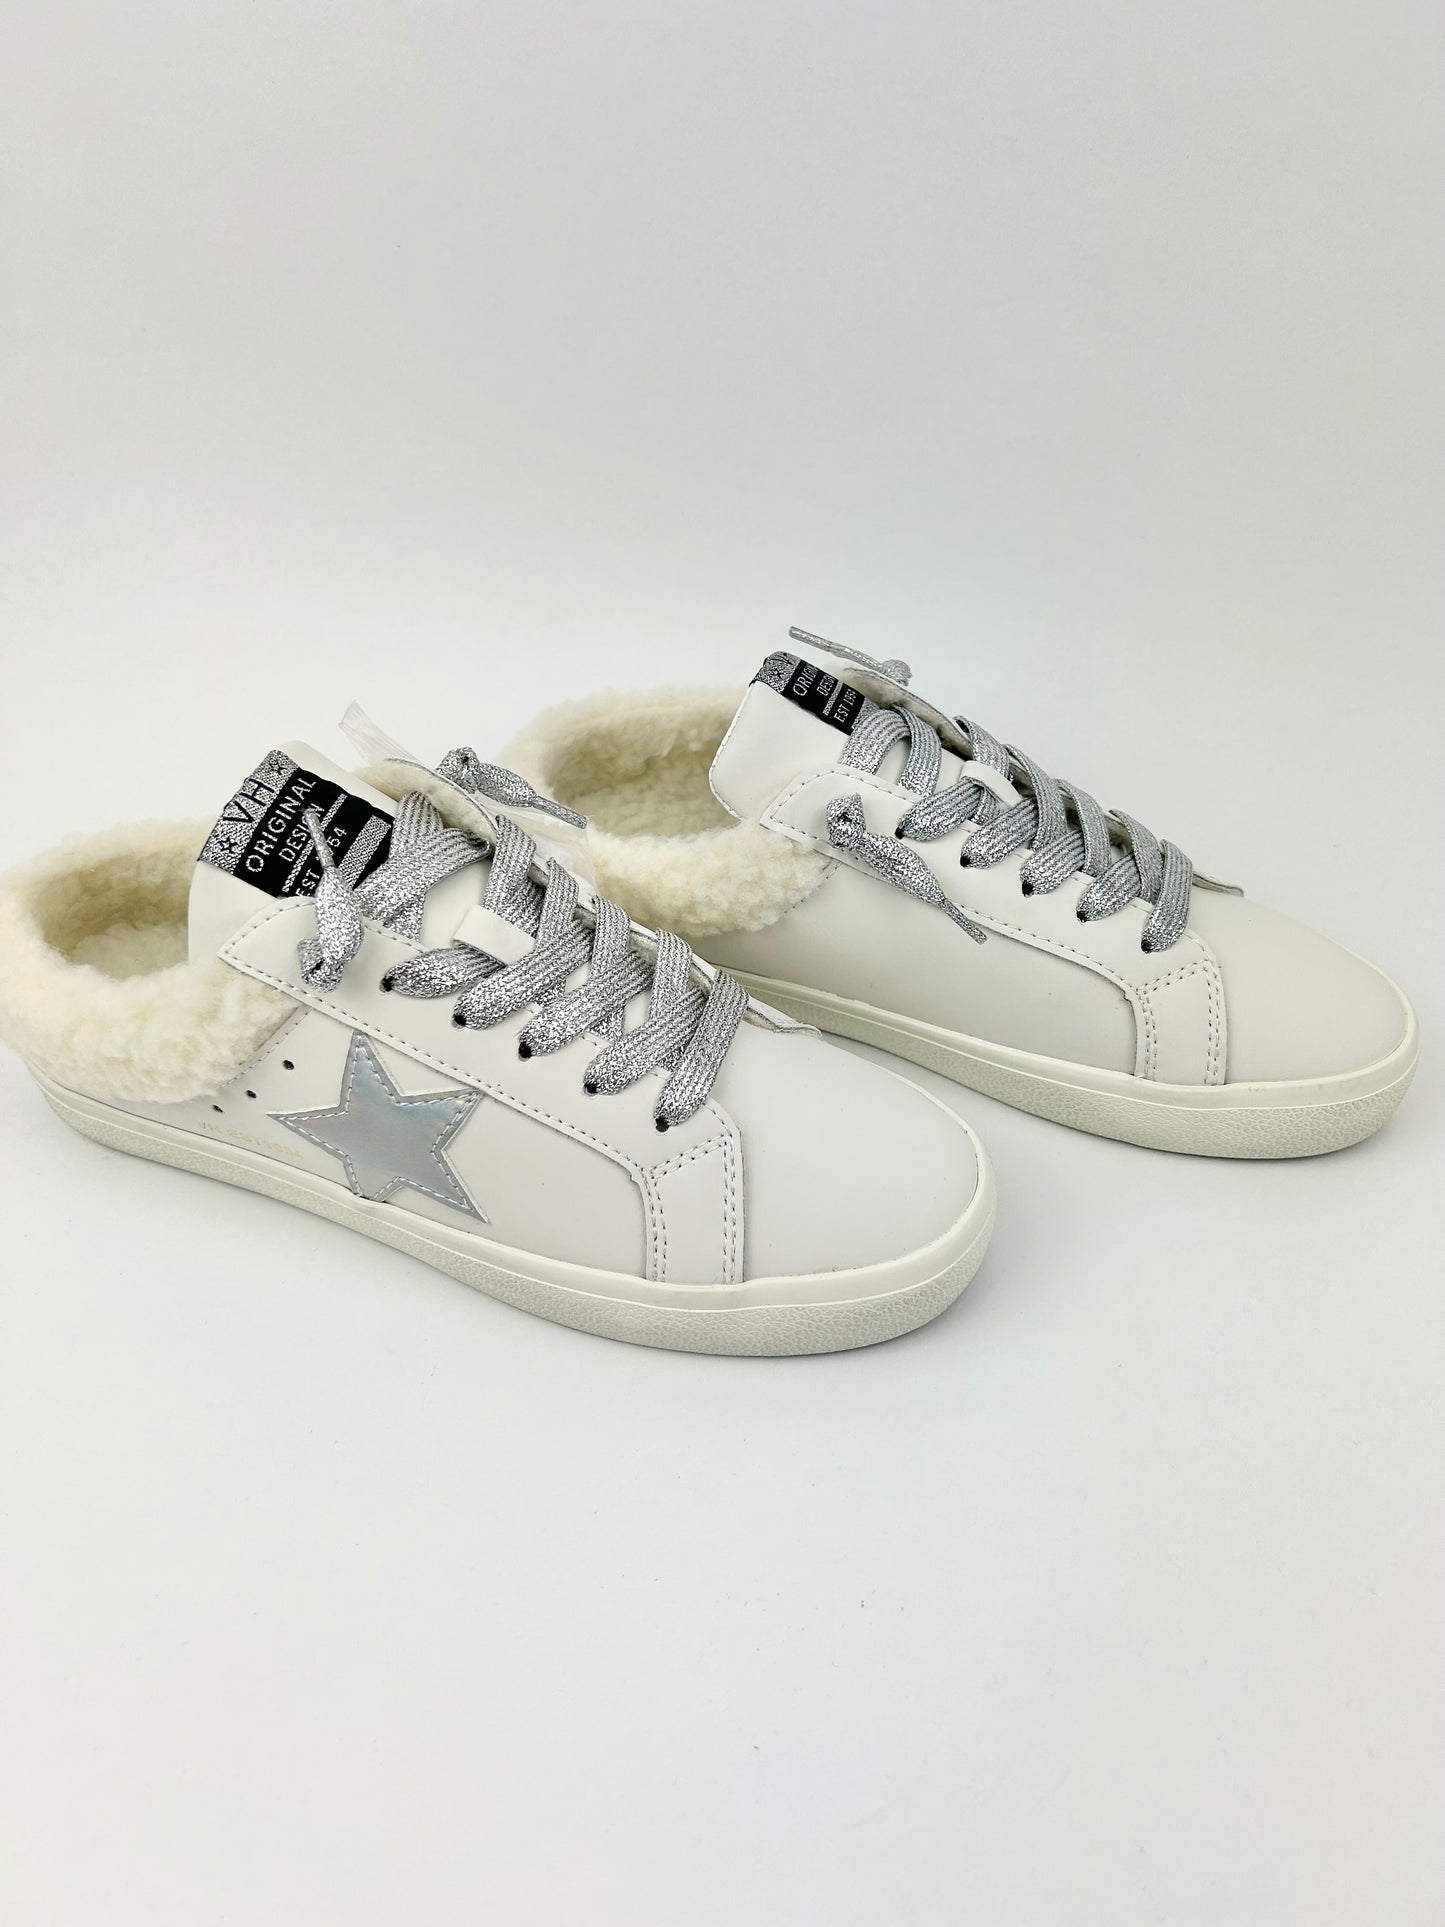 Hearty Furry Holog Sneaker Shoes in 5.5 at Wrapsody